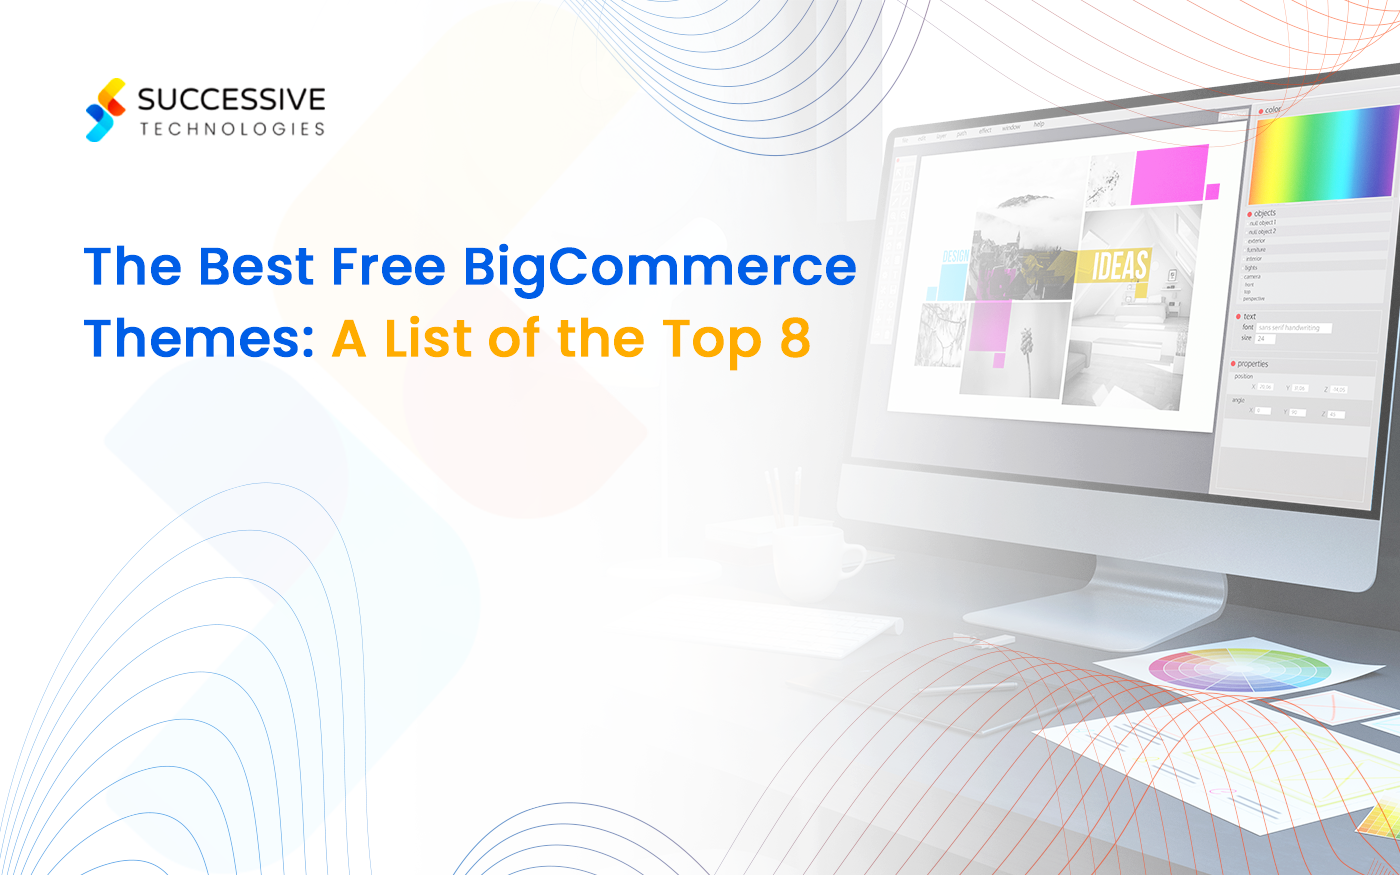 The Best Free BigCommerce Themes: A List of the Top 8